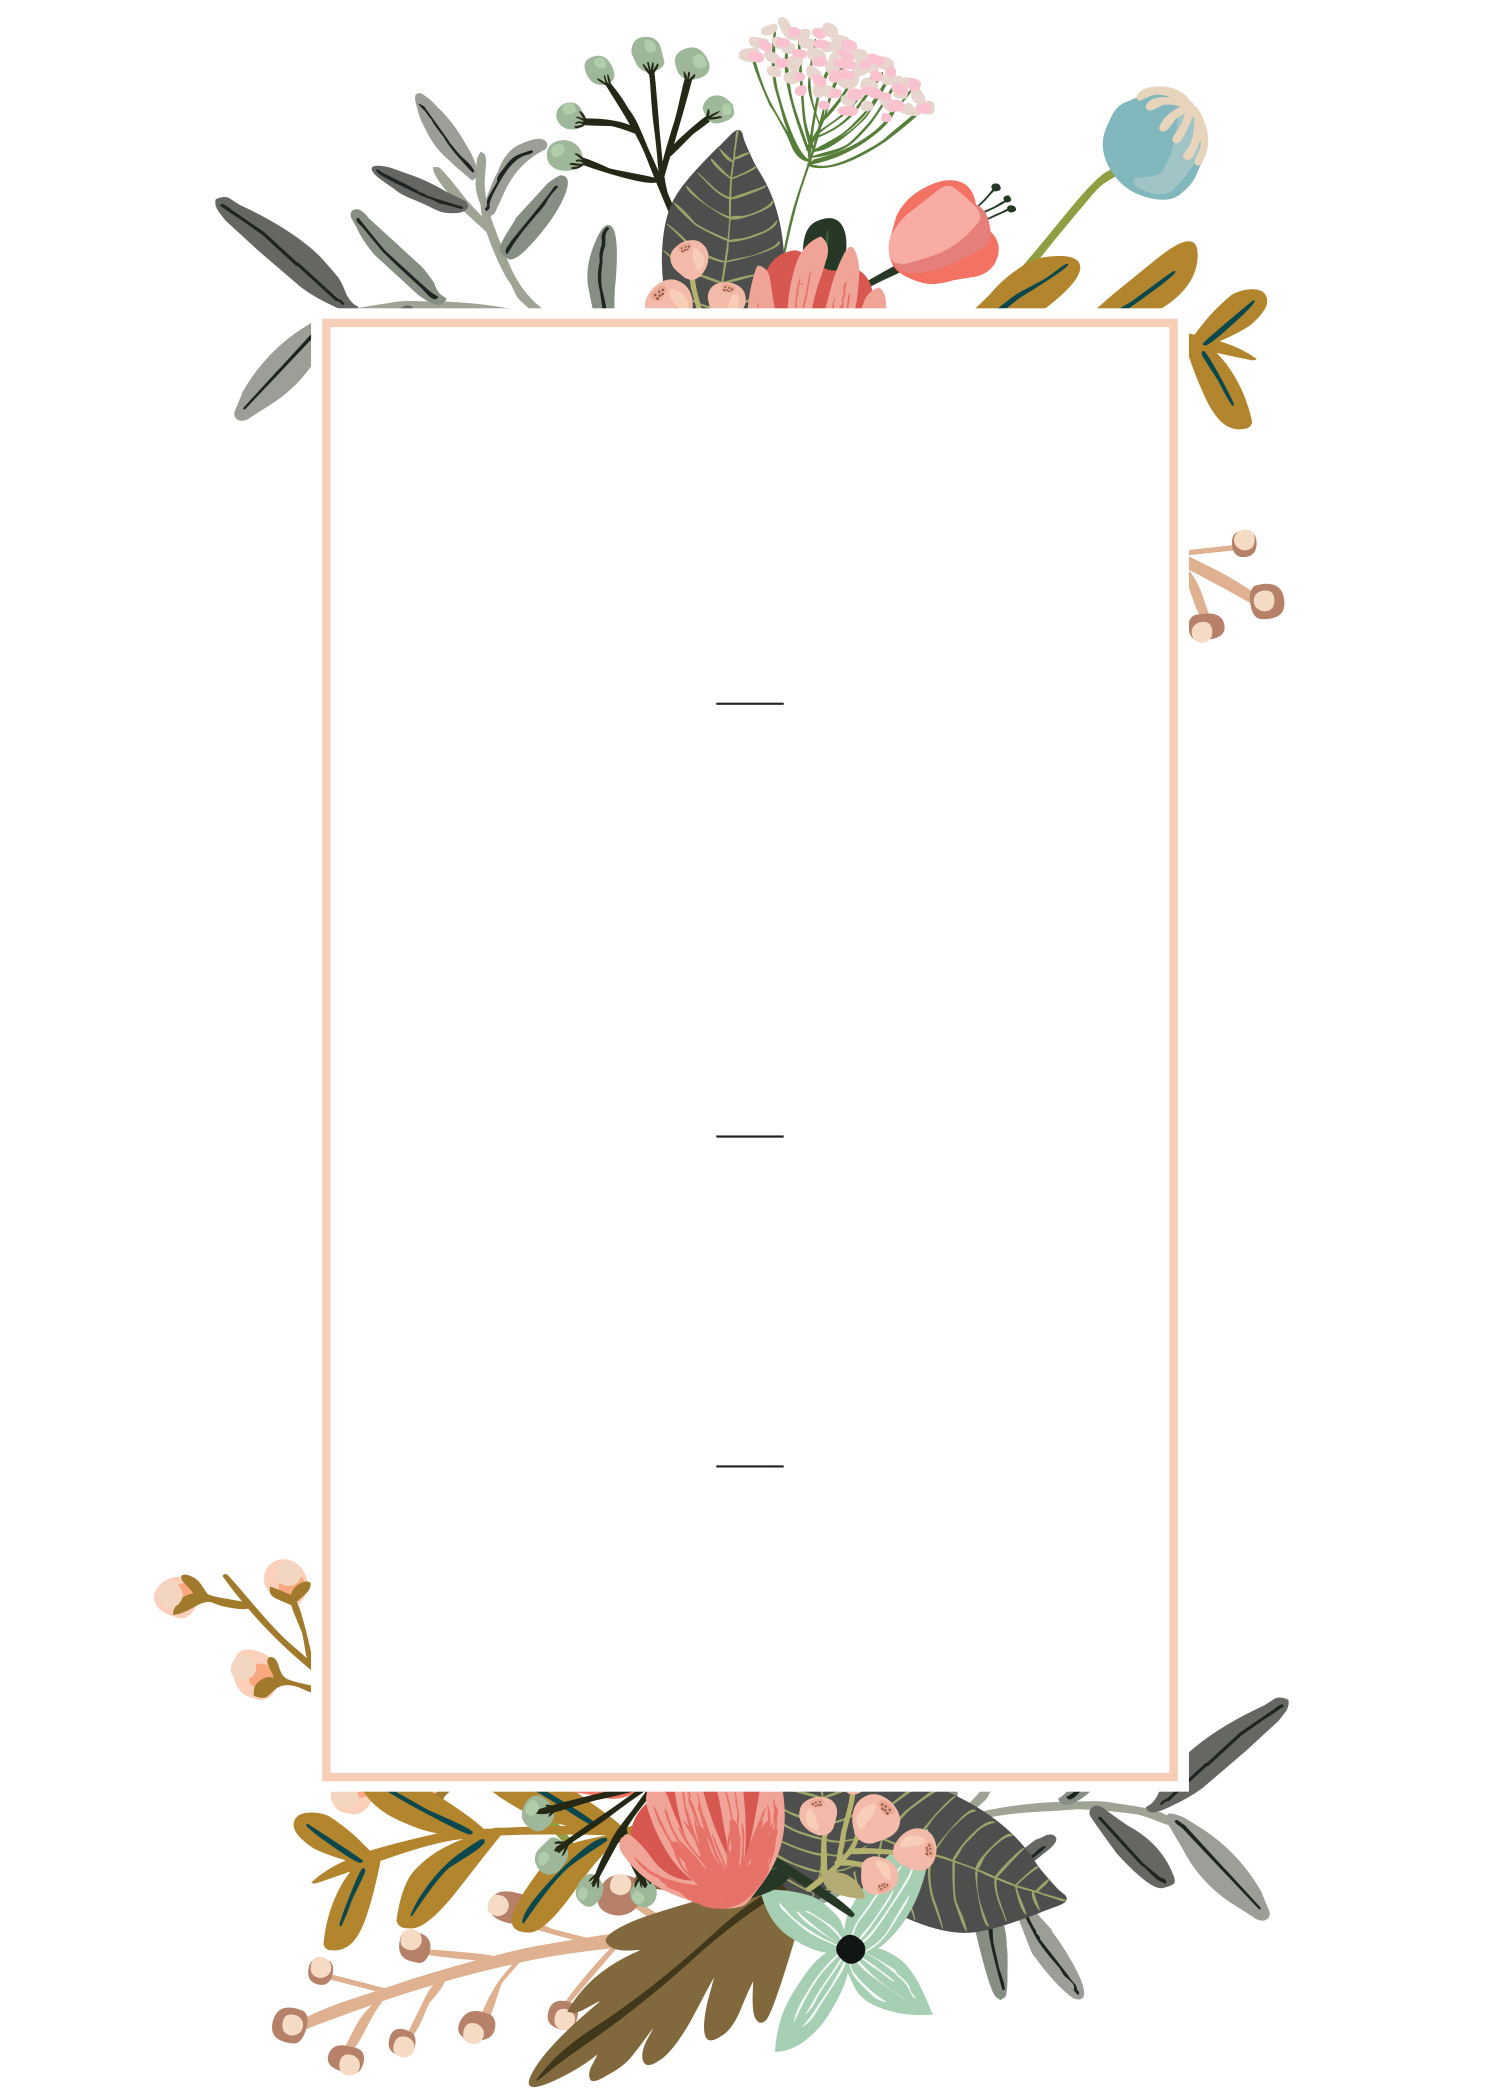 Editable Wedding Invitation Templates For The Perfect Card Shutterfly with regard to dimensions 1500 X 2100